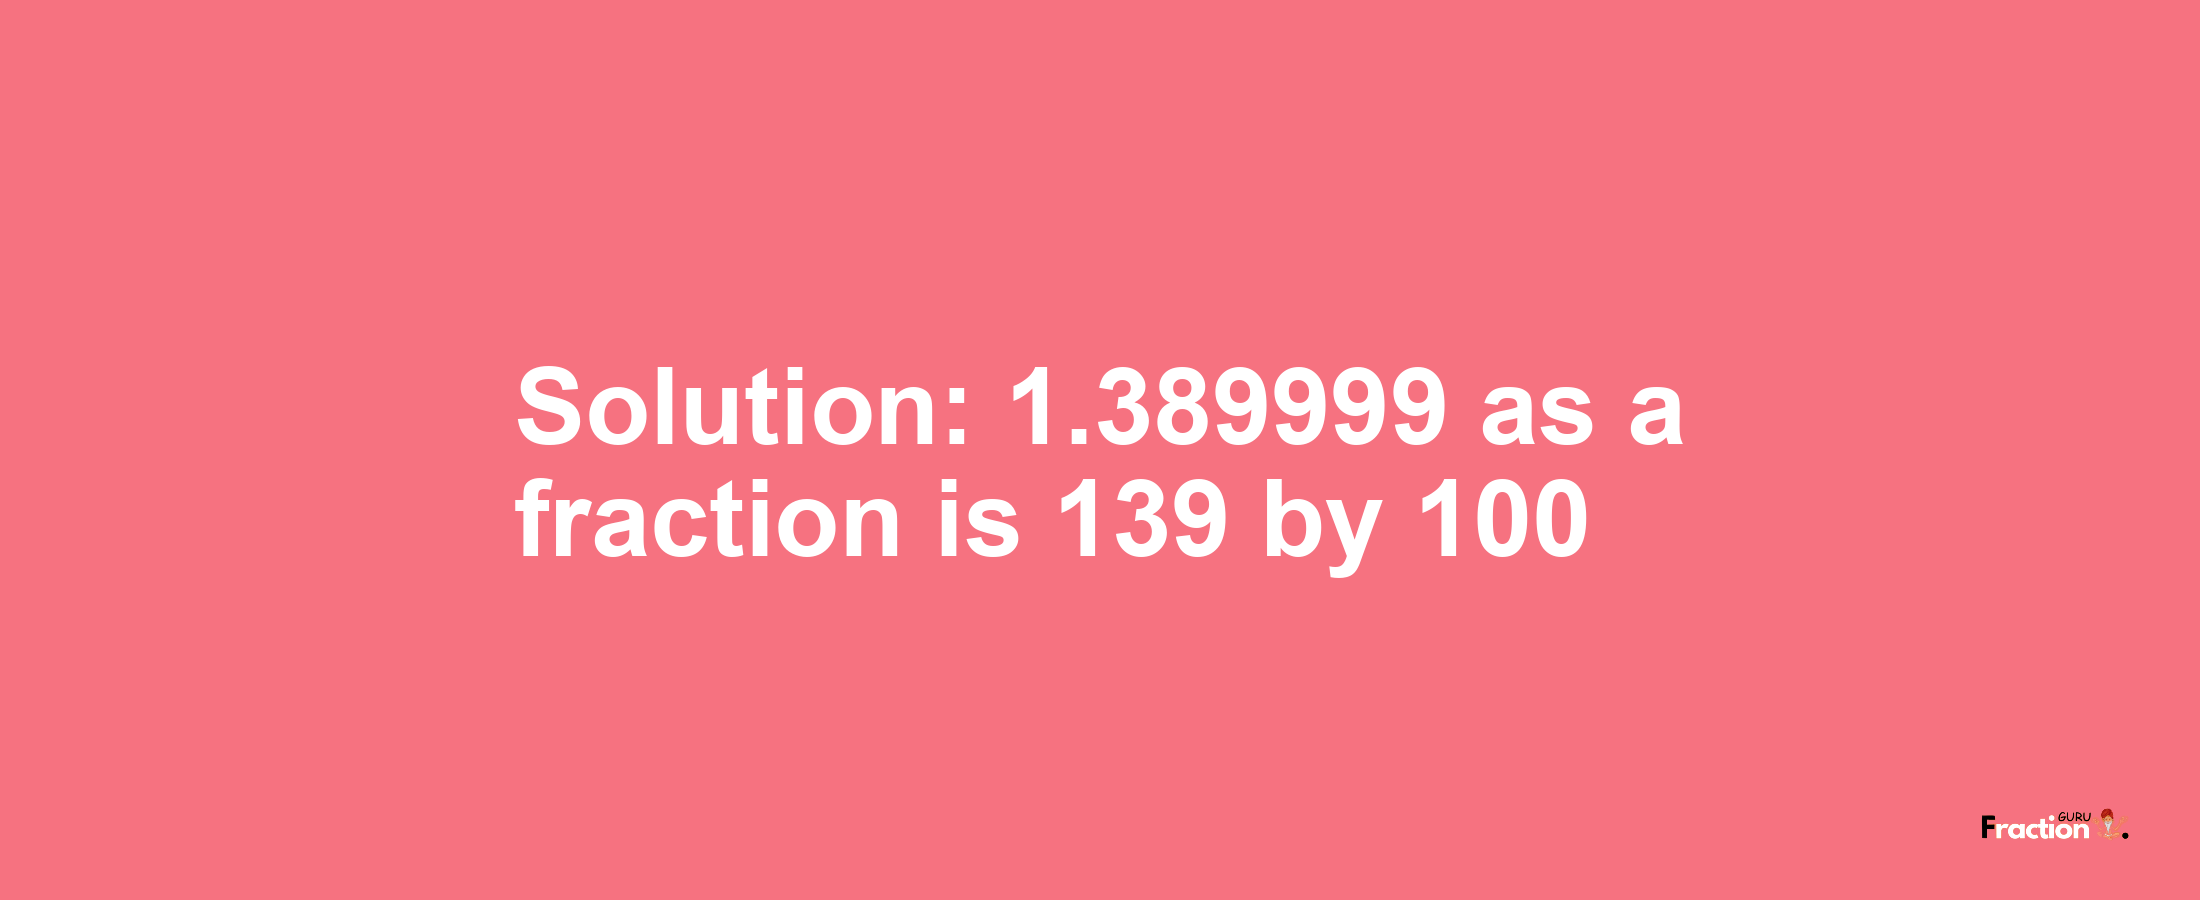 Solution:1.389999 as a fraction is 139/100